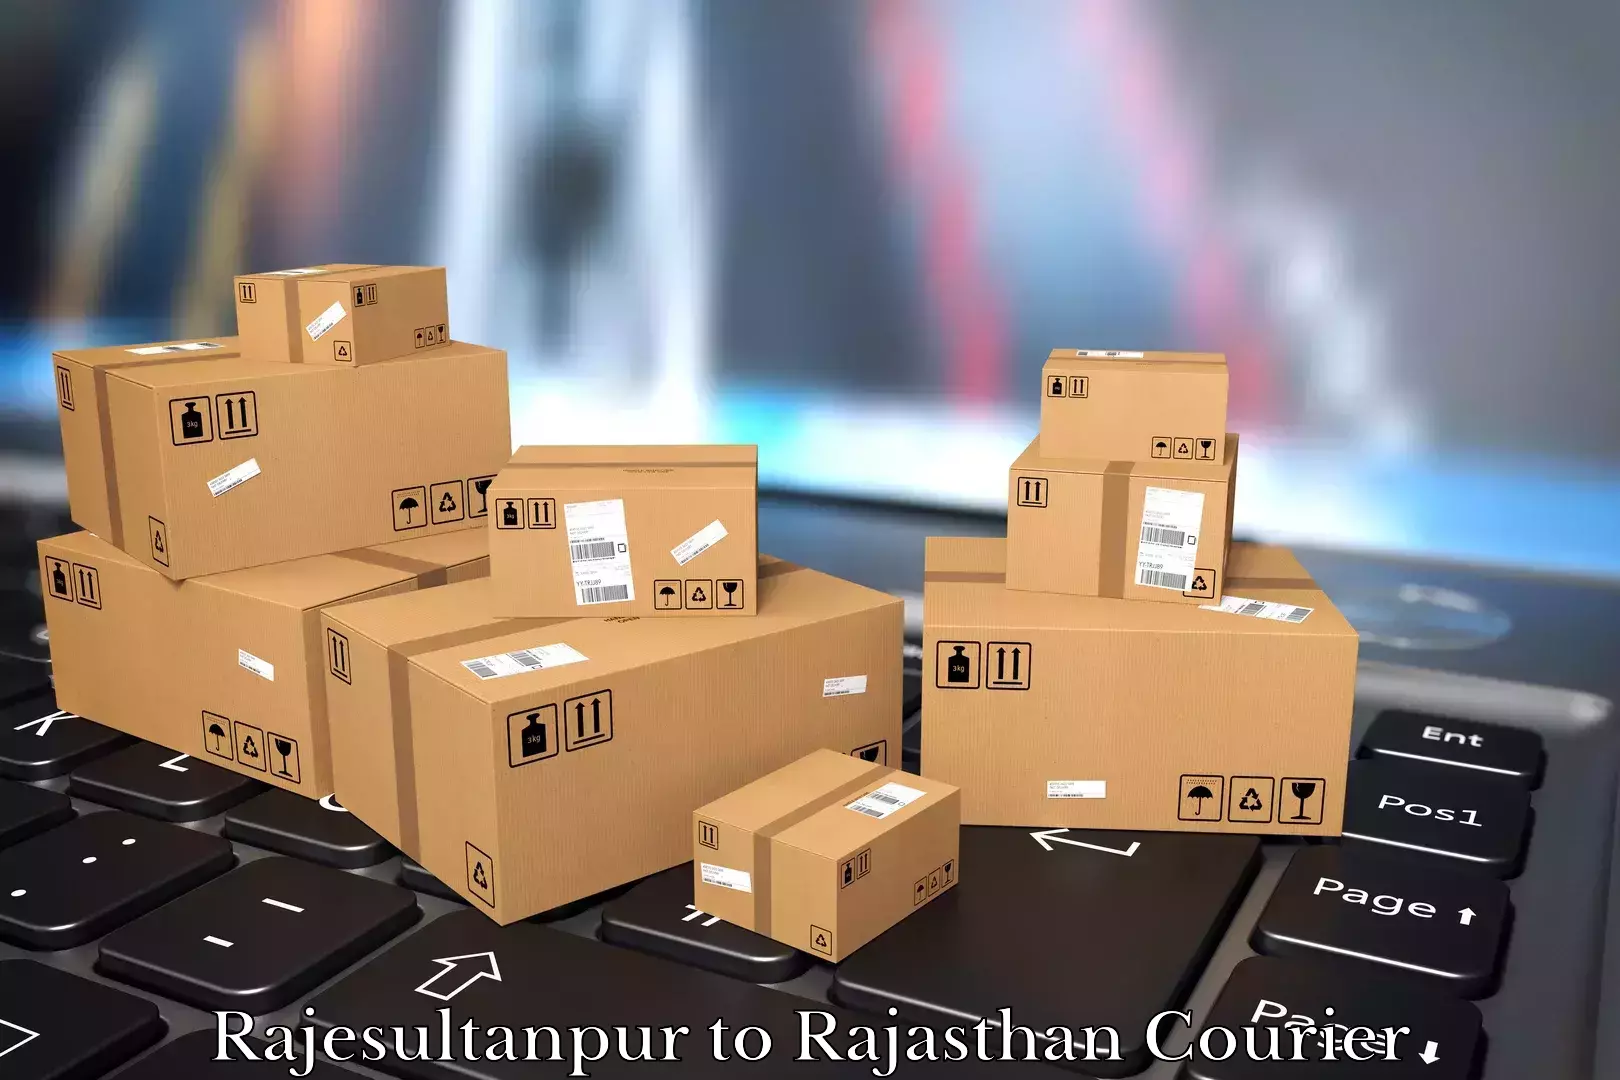 Furniture shipping services Rajesultanpur to Banar